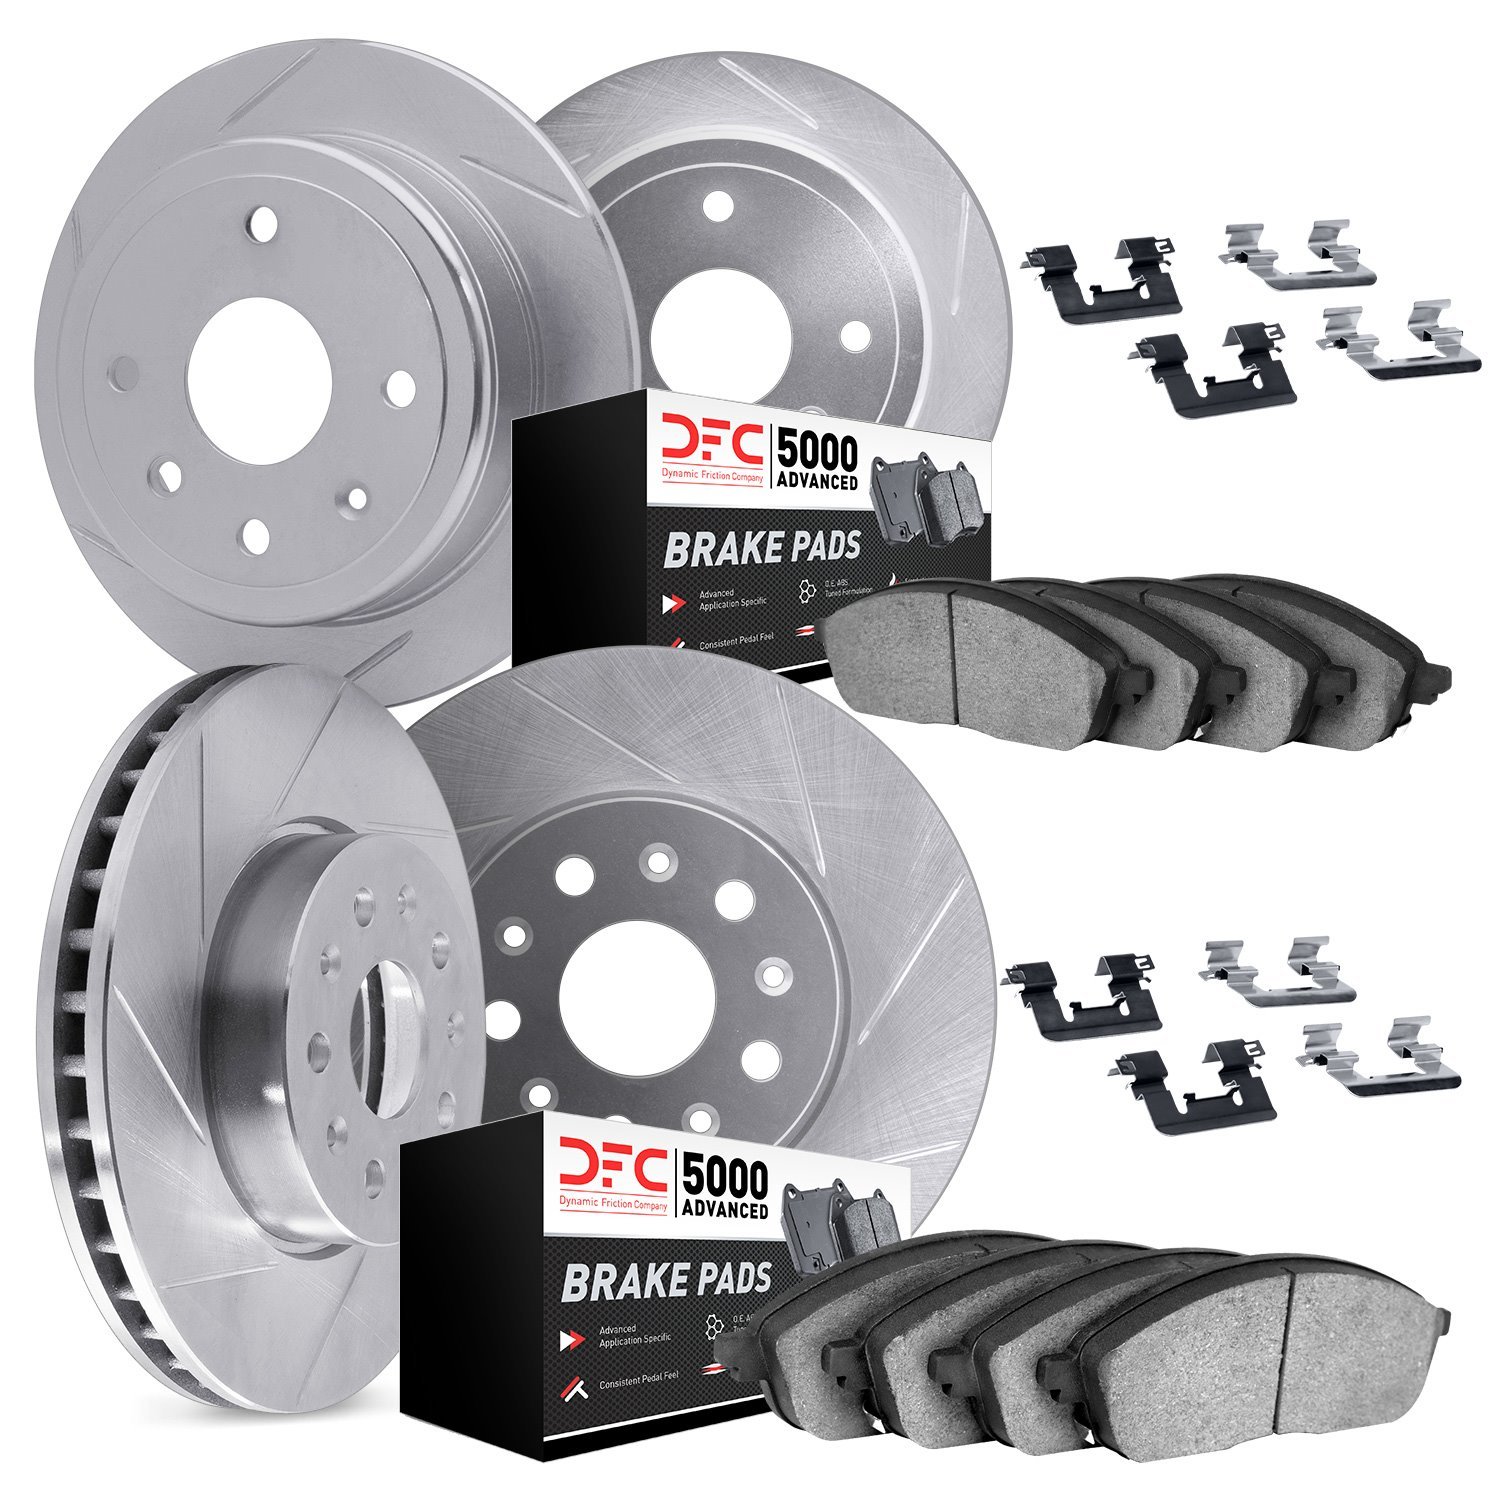 5514-39012 Slotted Brake Rotors w/5000 Advanced Brake Pads Kit & Hardware [Silver], 2007-2013 Mitsubishi, Position: Front and Re